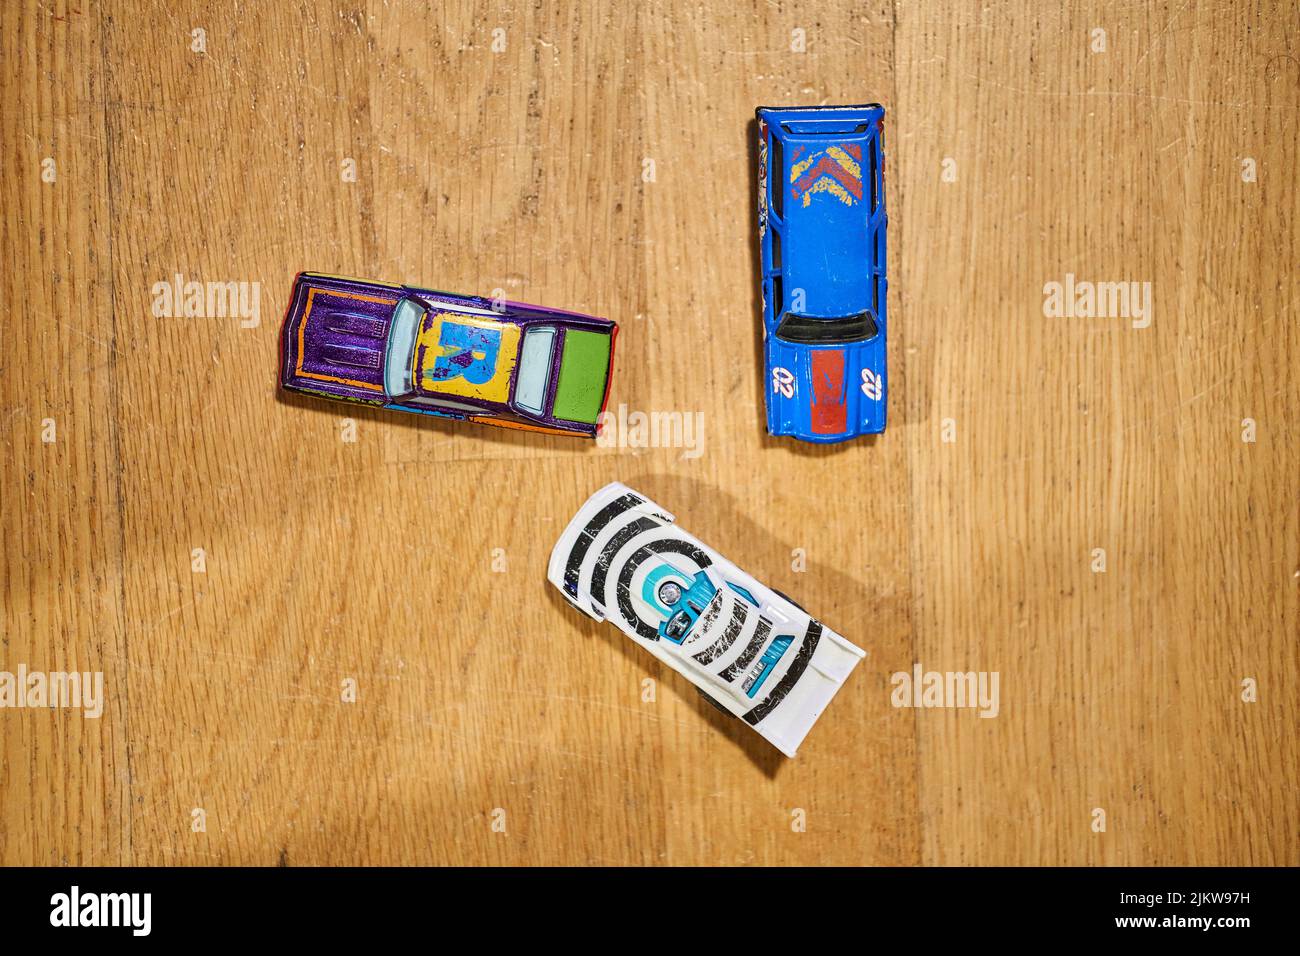 A top view of Mattel Hot Wheels brand toy model cars on a wooden surface Stock Photo